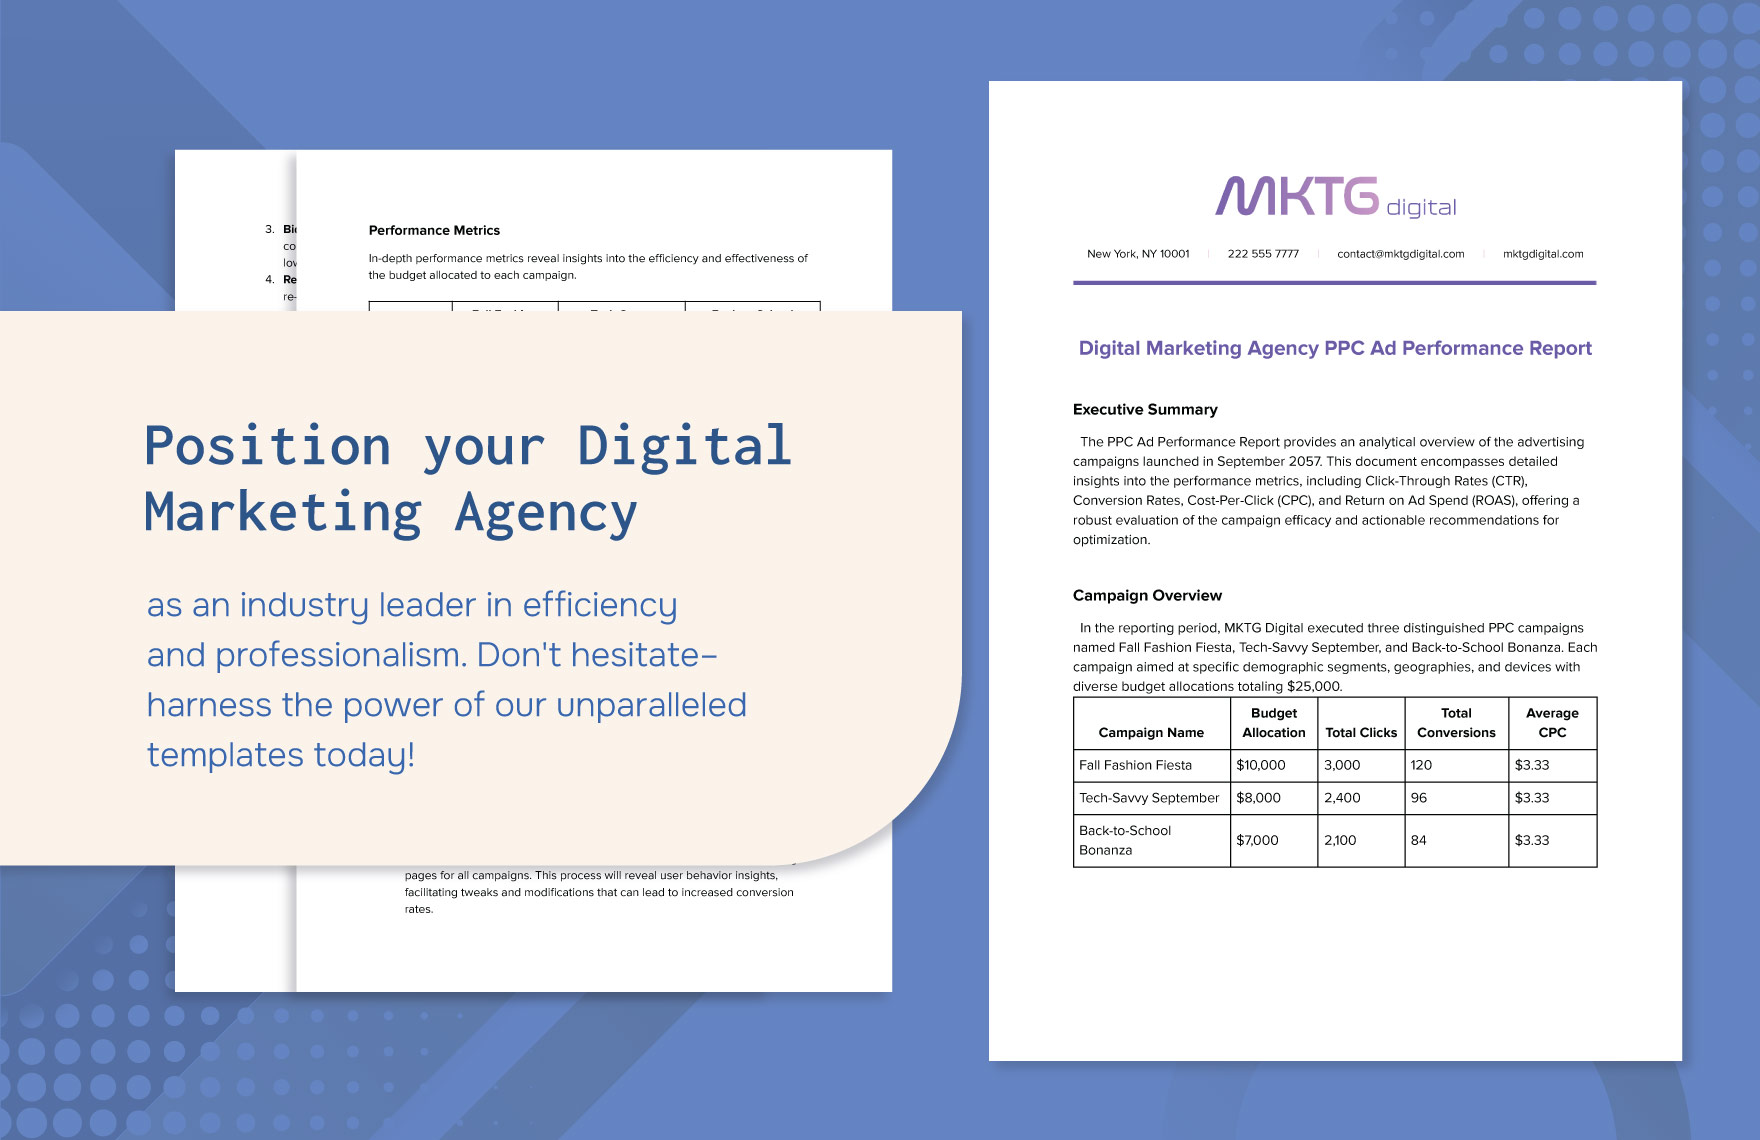 Digital Marketing Agency PPC Ad Performance Report Template